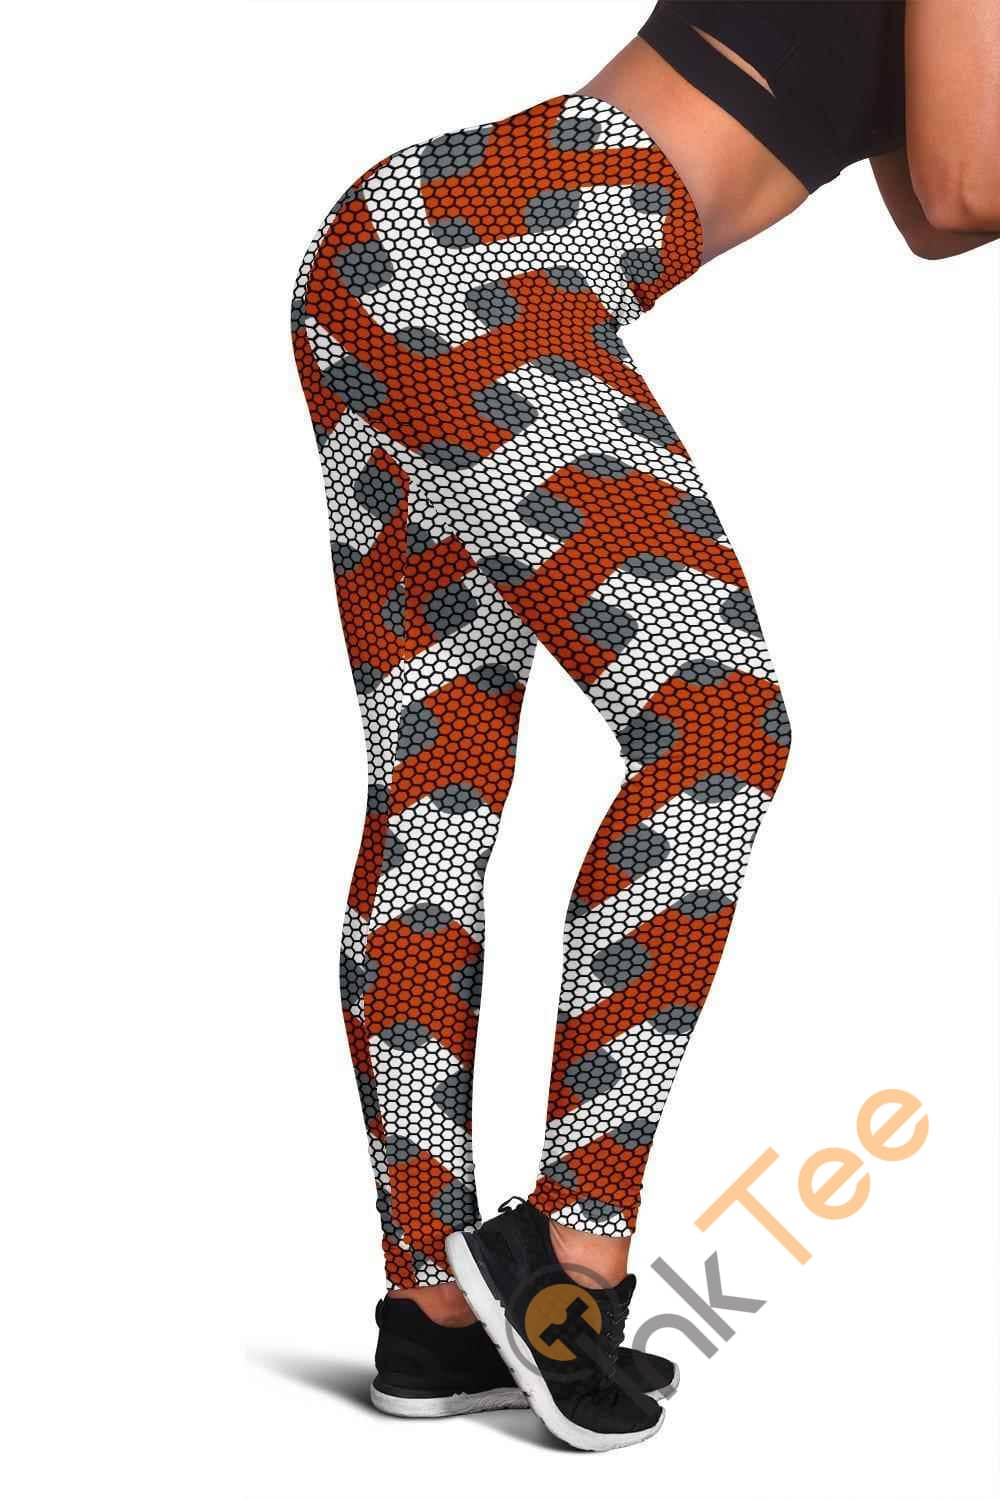 Inktee Store - Syracuse Orange Inspired Liberty 3D All Over Print For Yoga Fitness Fashion Women'S Leggings Image